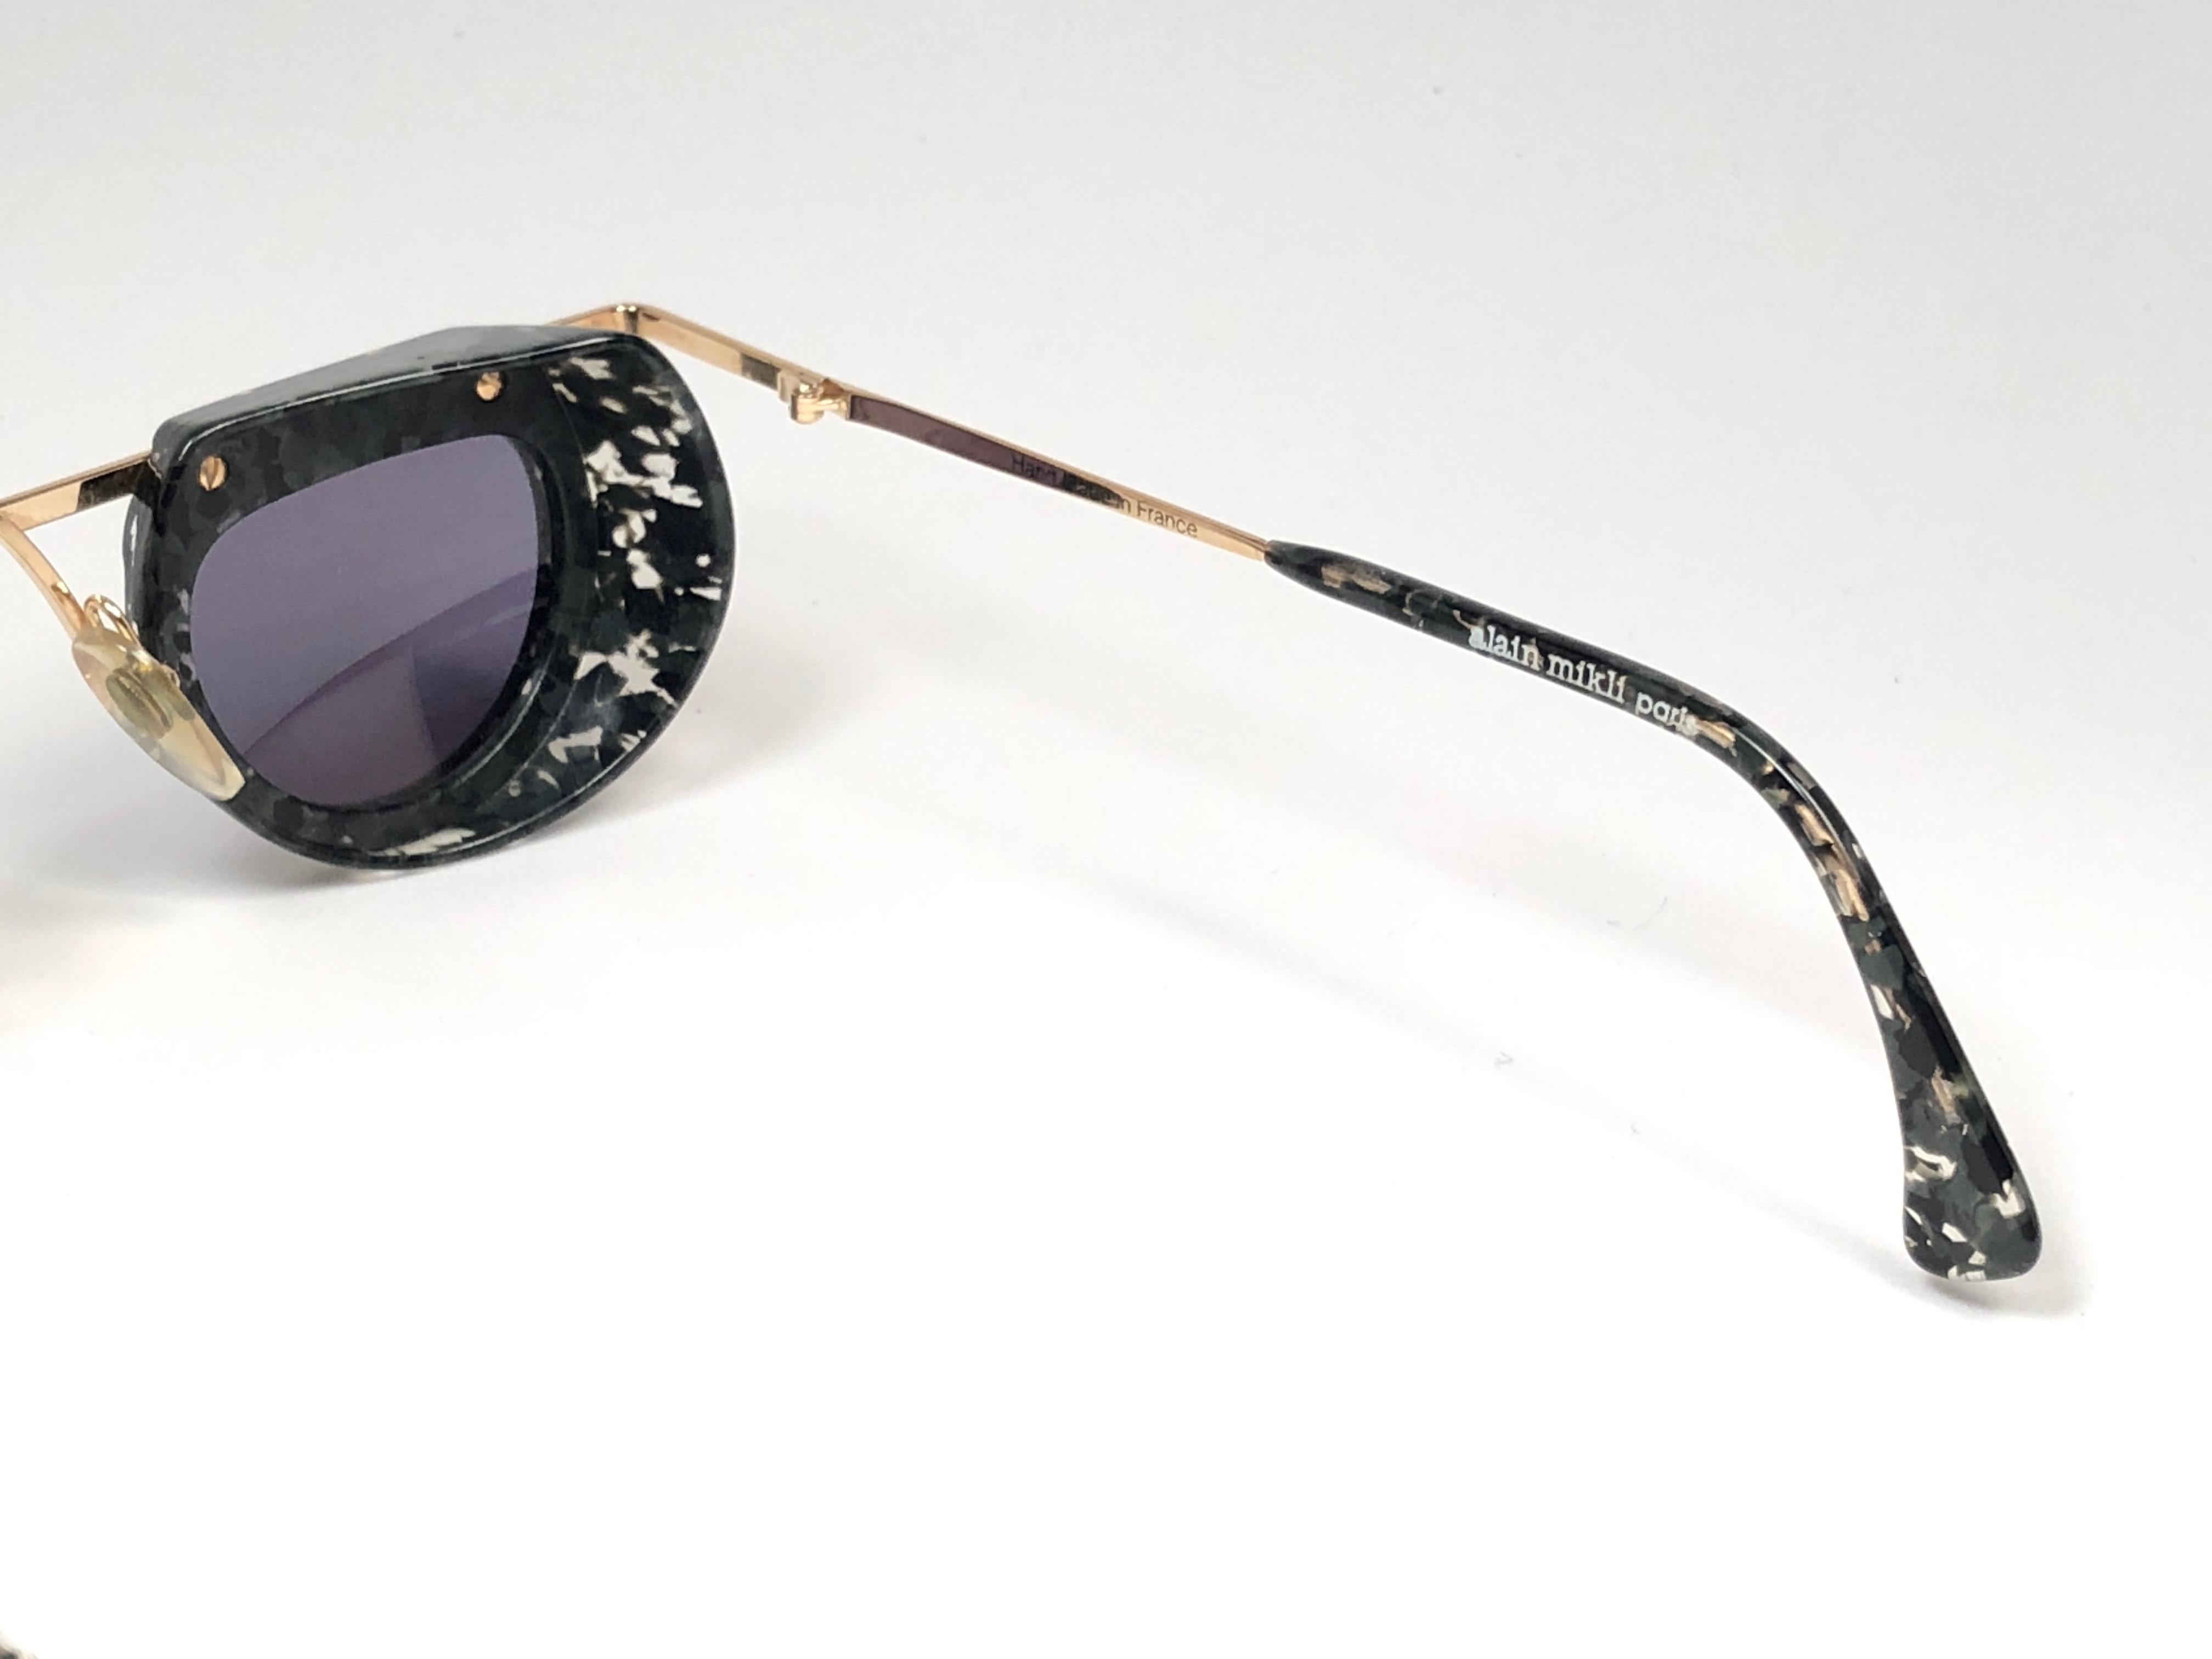 Mint Vintage Rare Alain Mikli 4102 614 Camouflage Sunglasses 1990 In New Condition For Sale In Baleares, Baleares